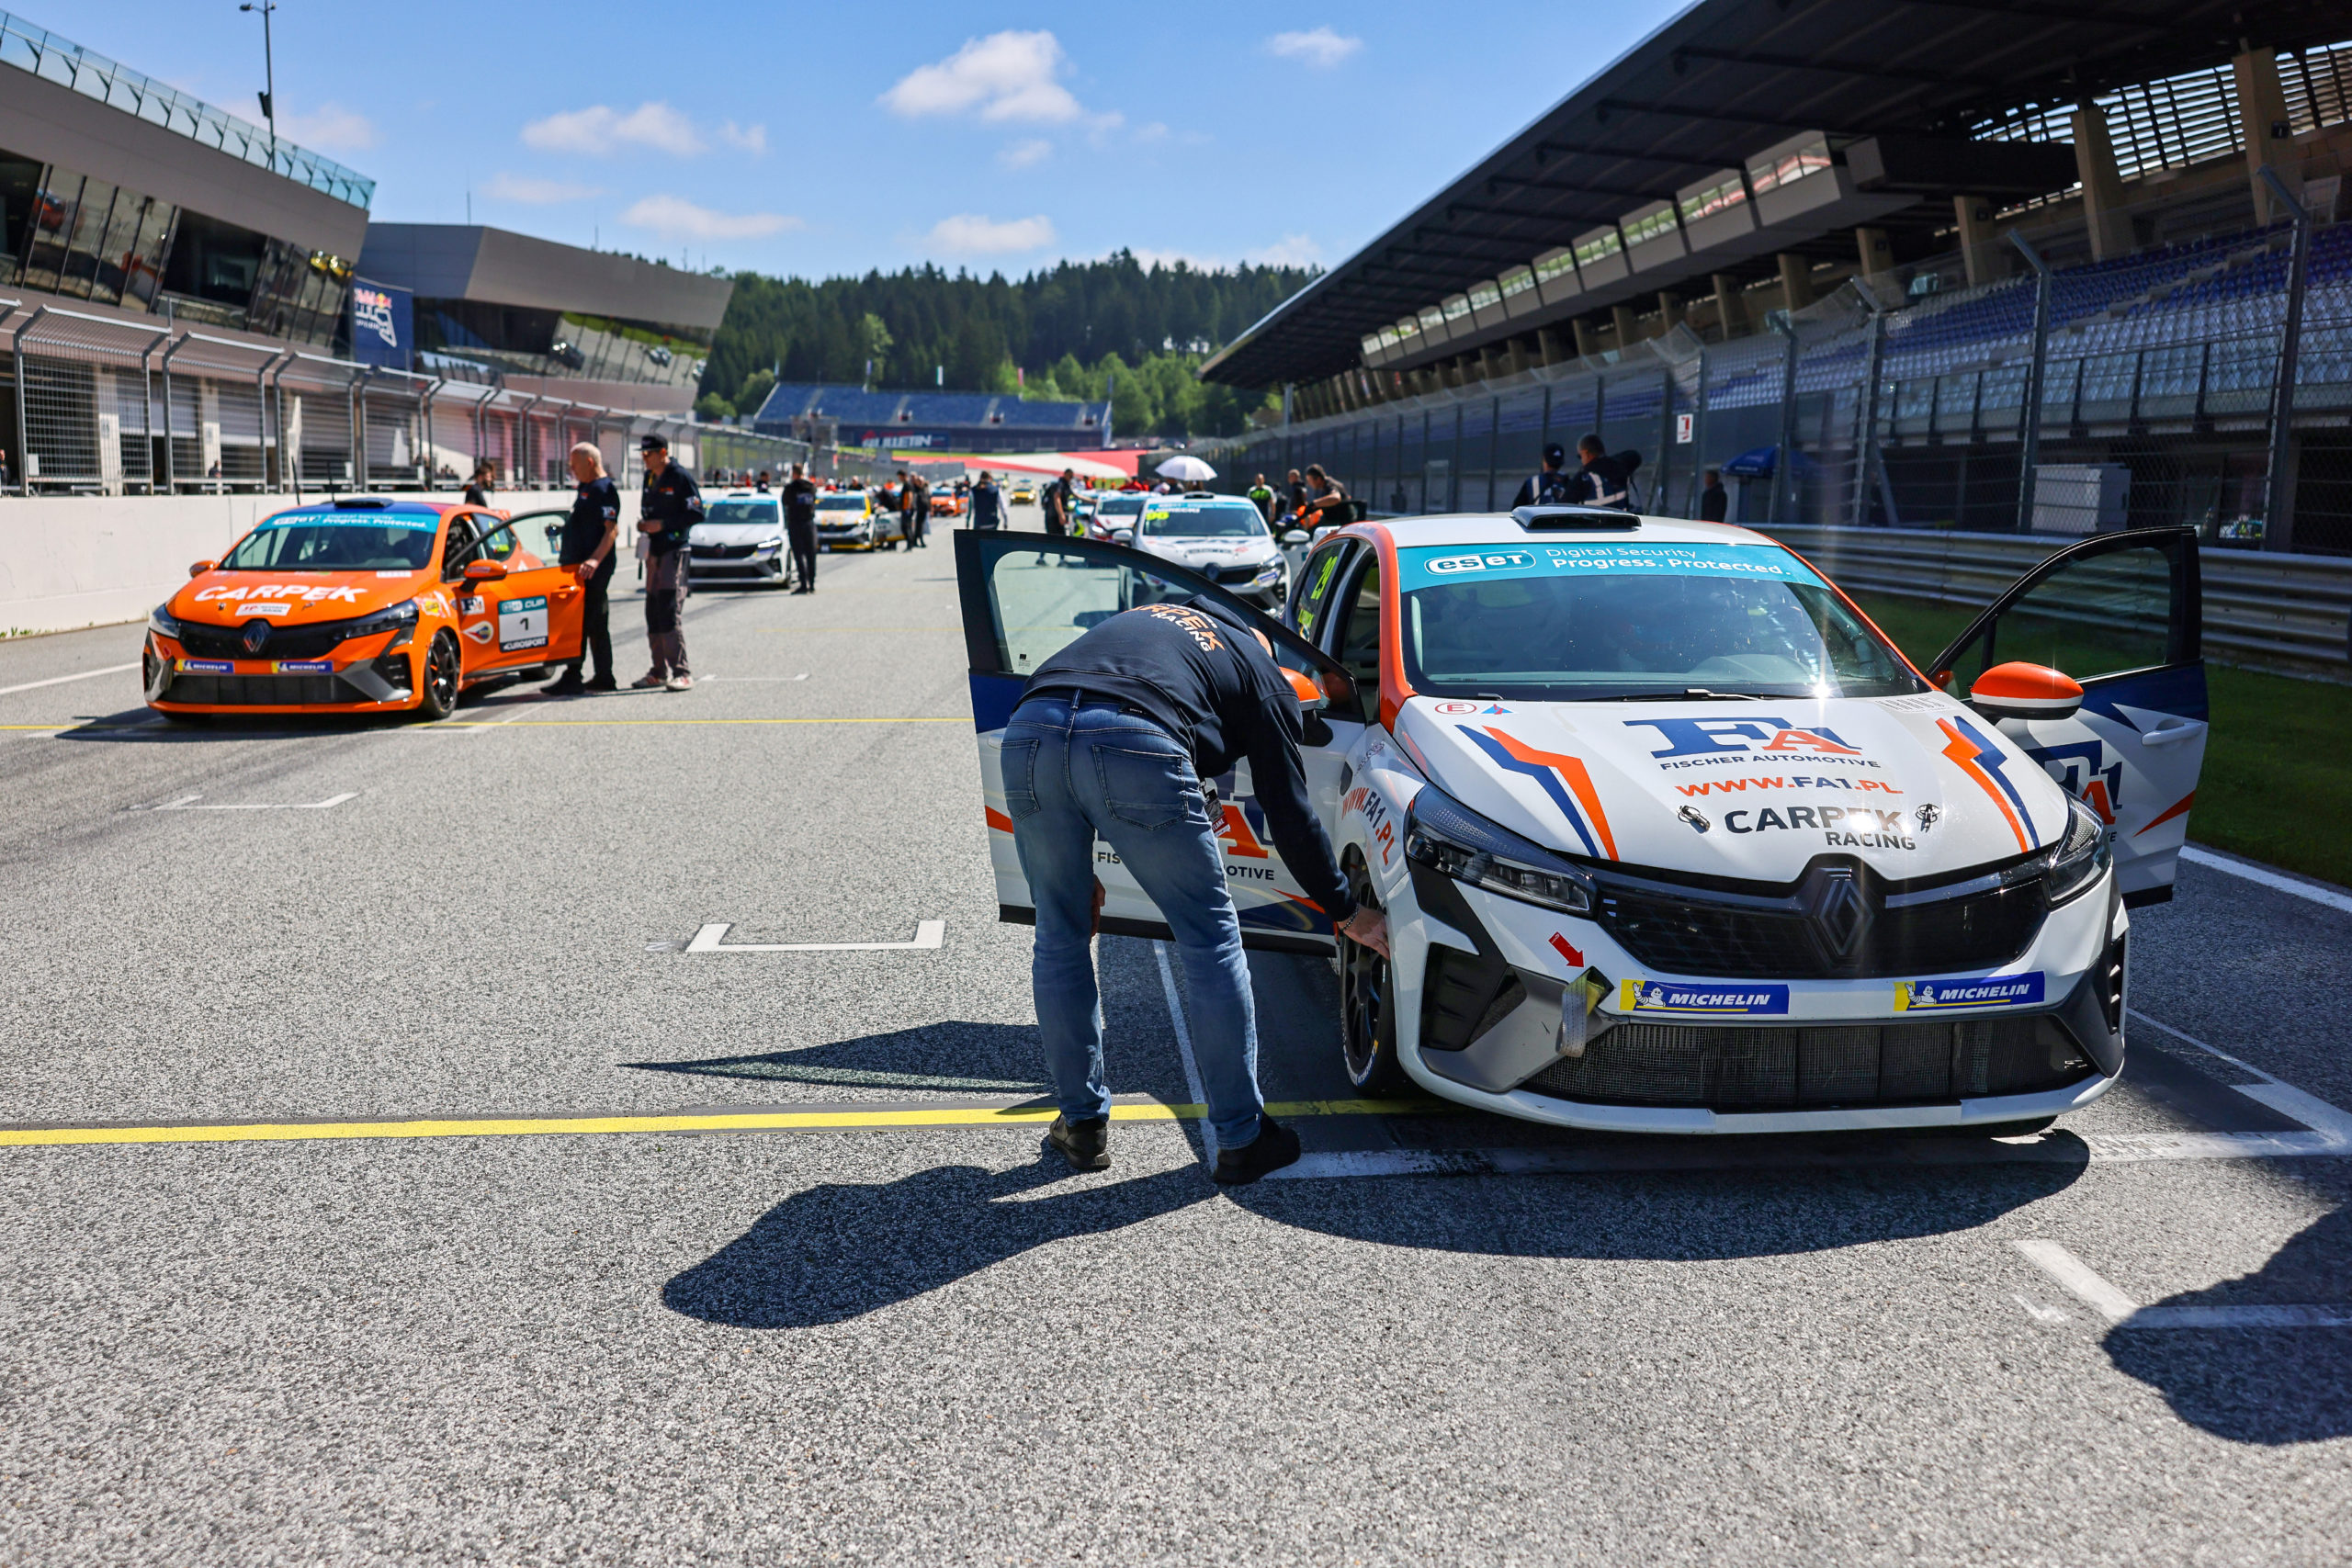 David Dziwok leaves Red Bull Ring undefeated, winning the second race as well